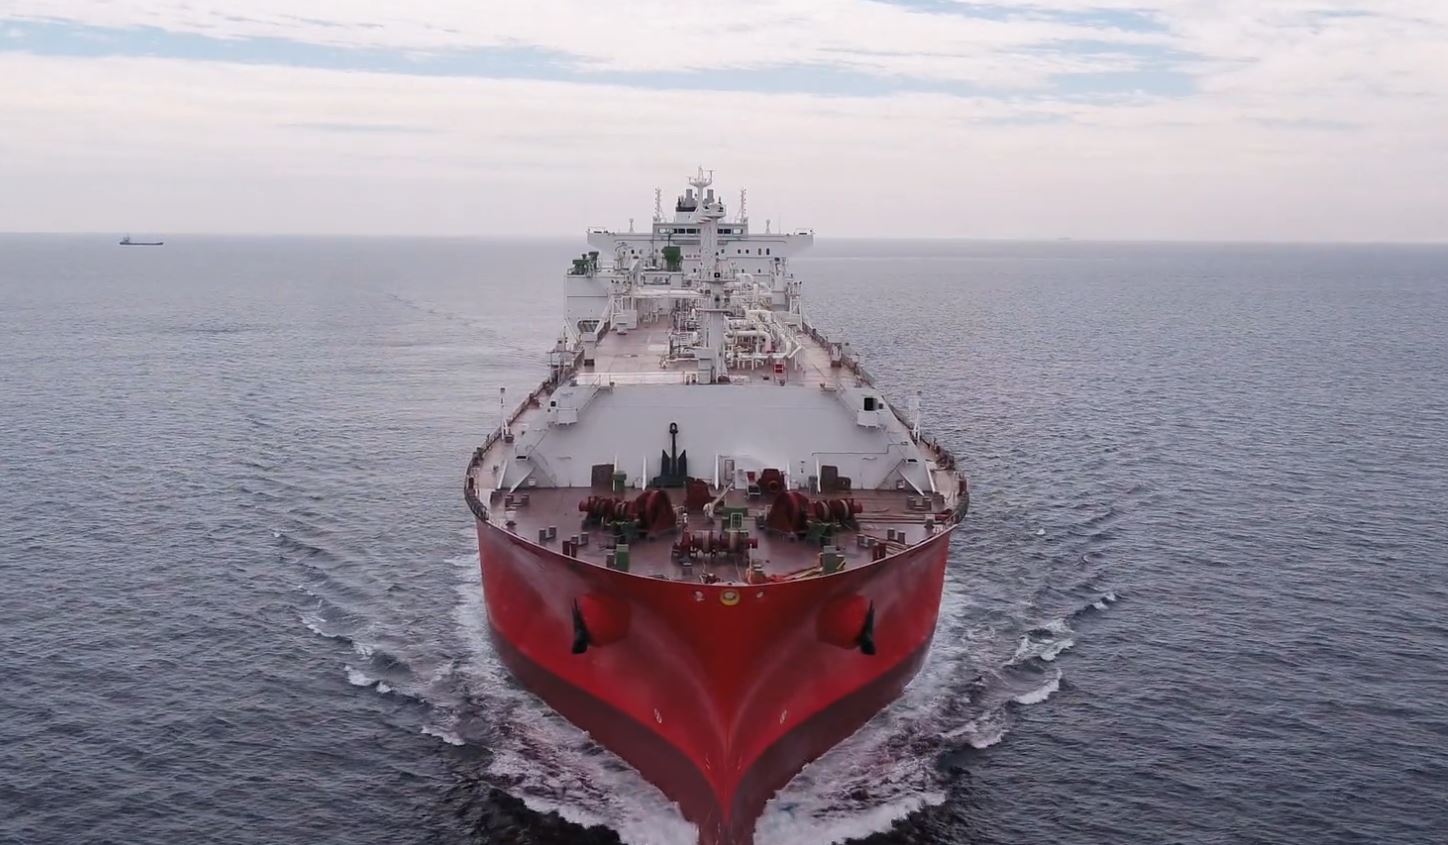 Denmark’s Celsius adds two LNG carriers to orderbook